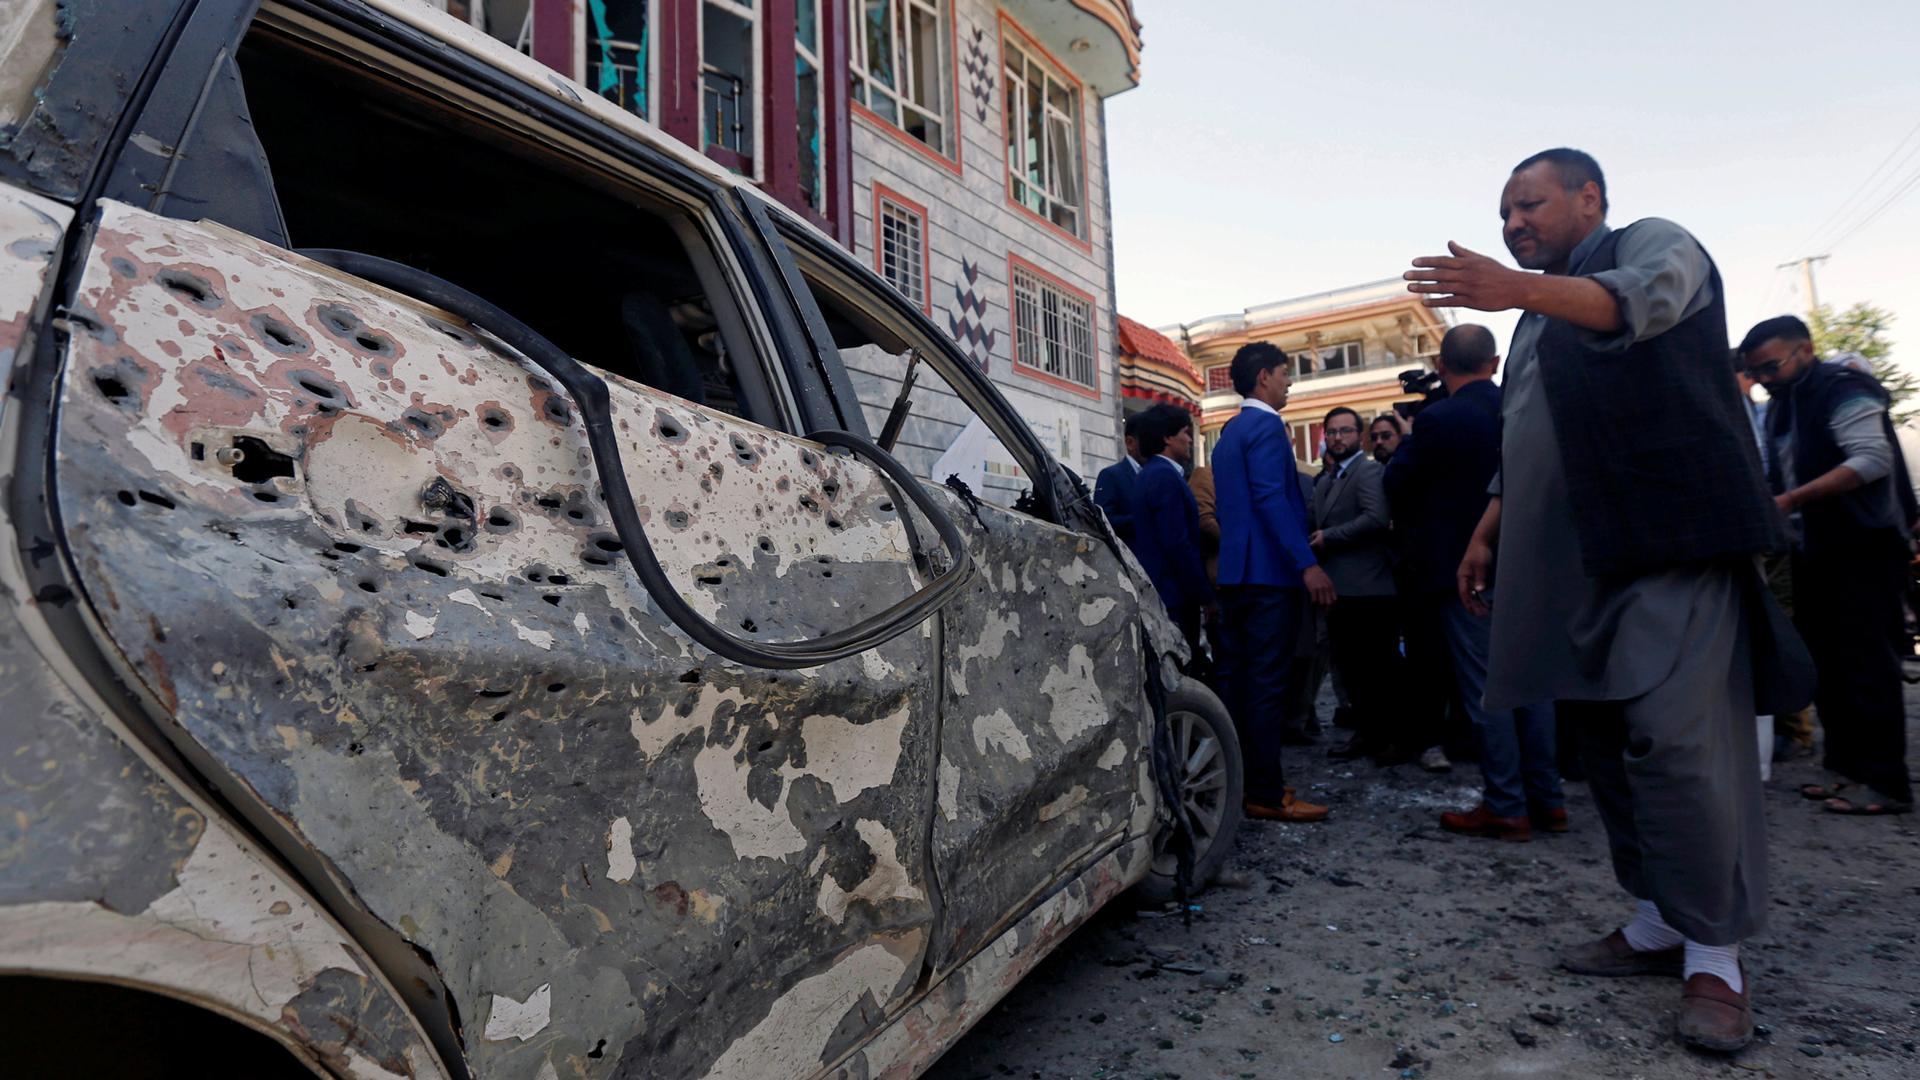 A man points left to a car that shows the impact of a bomb blast in Kabul.